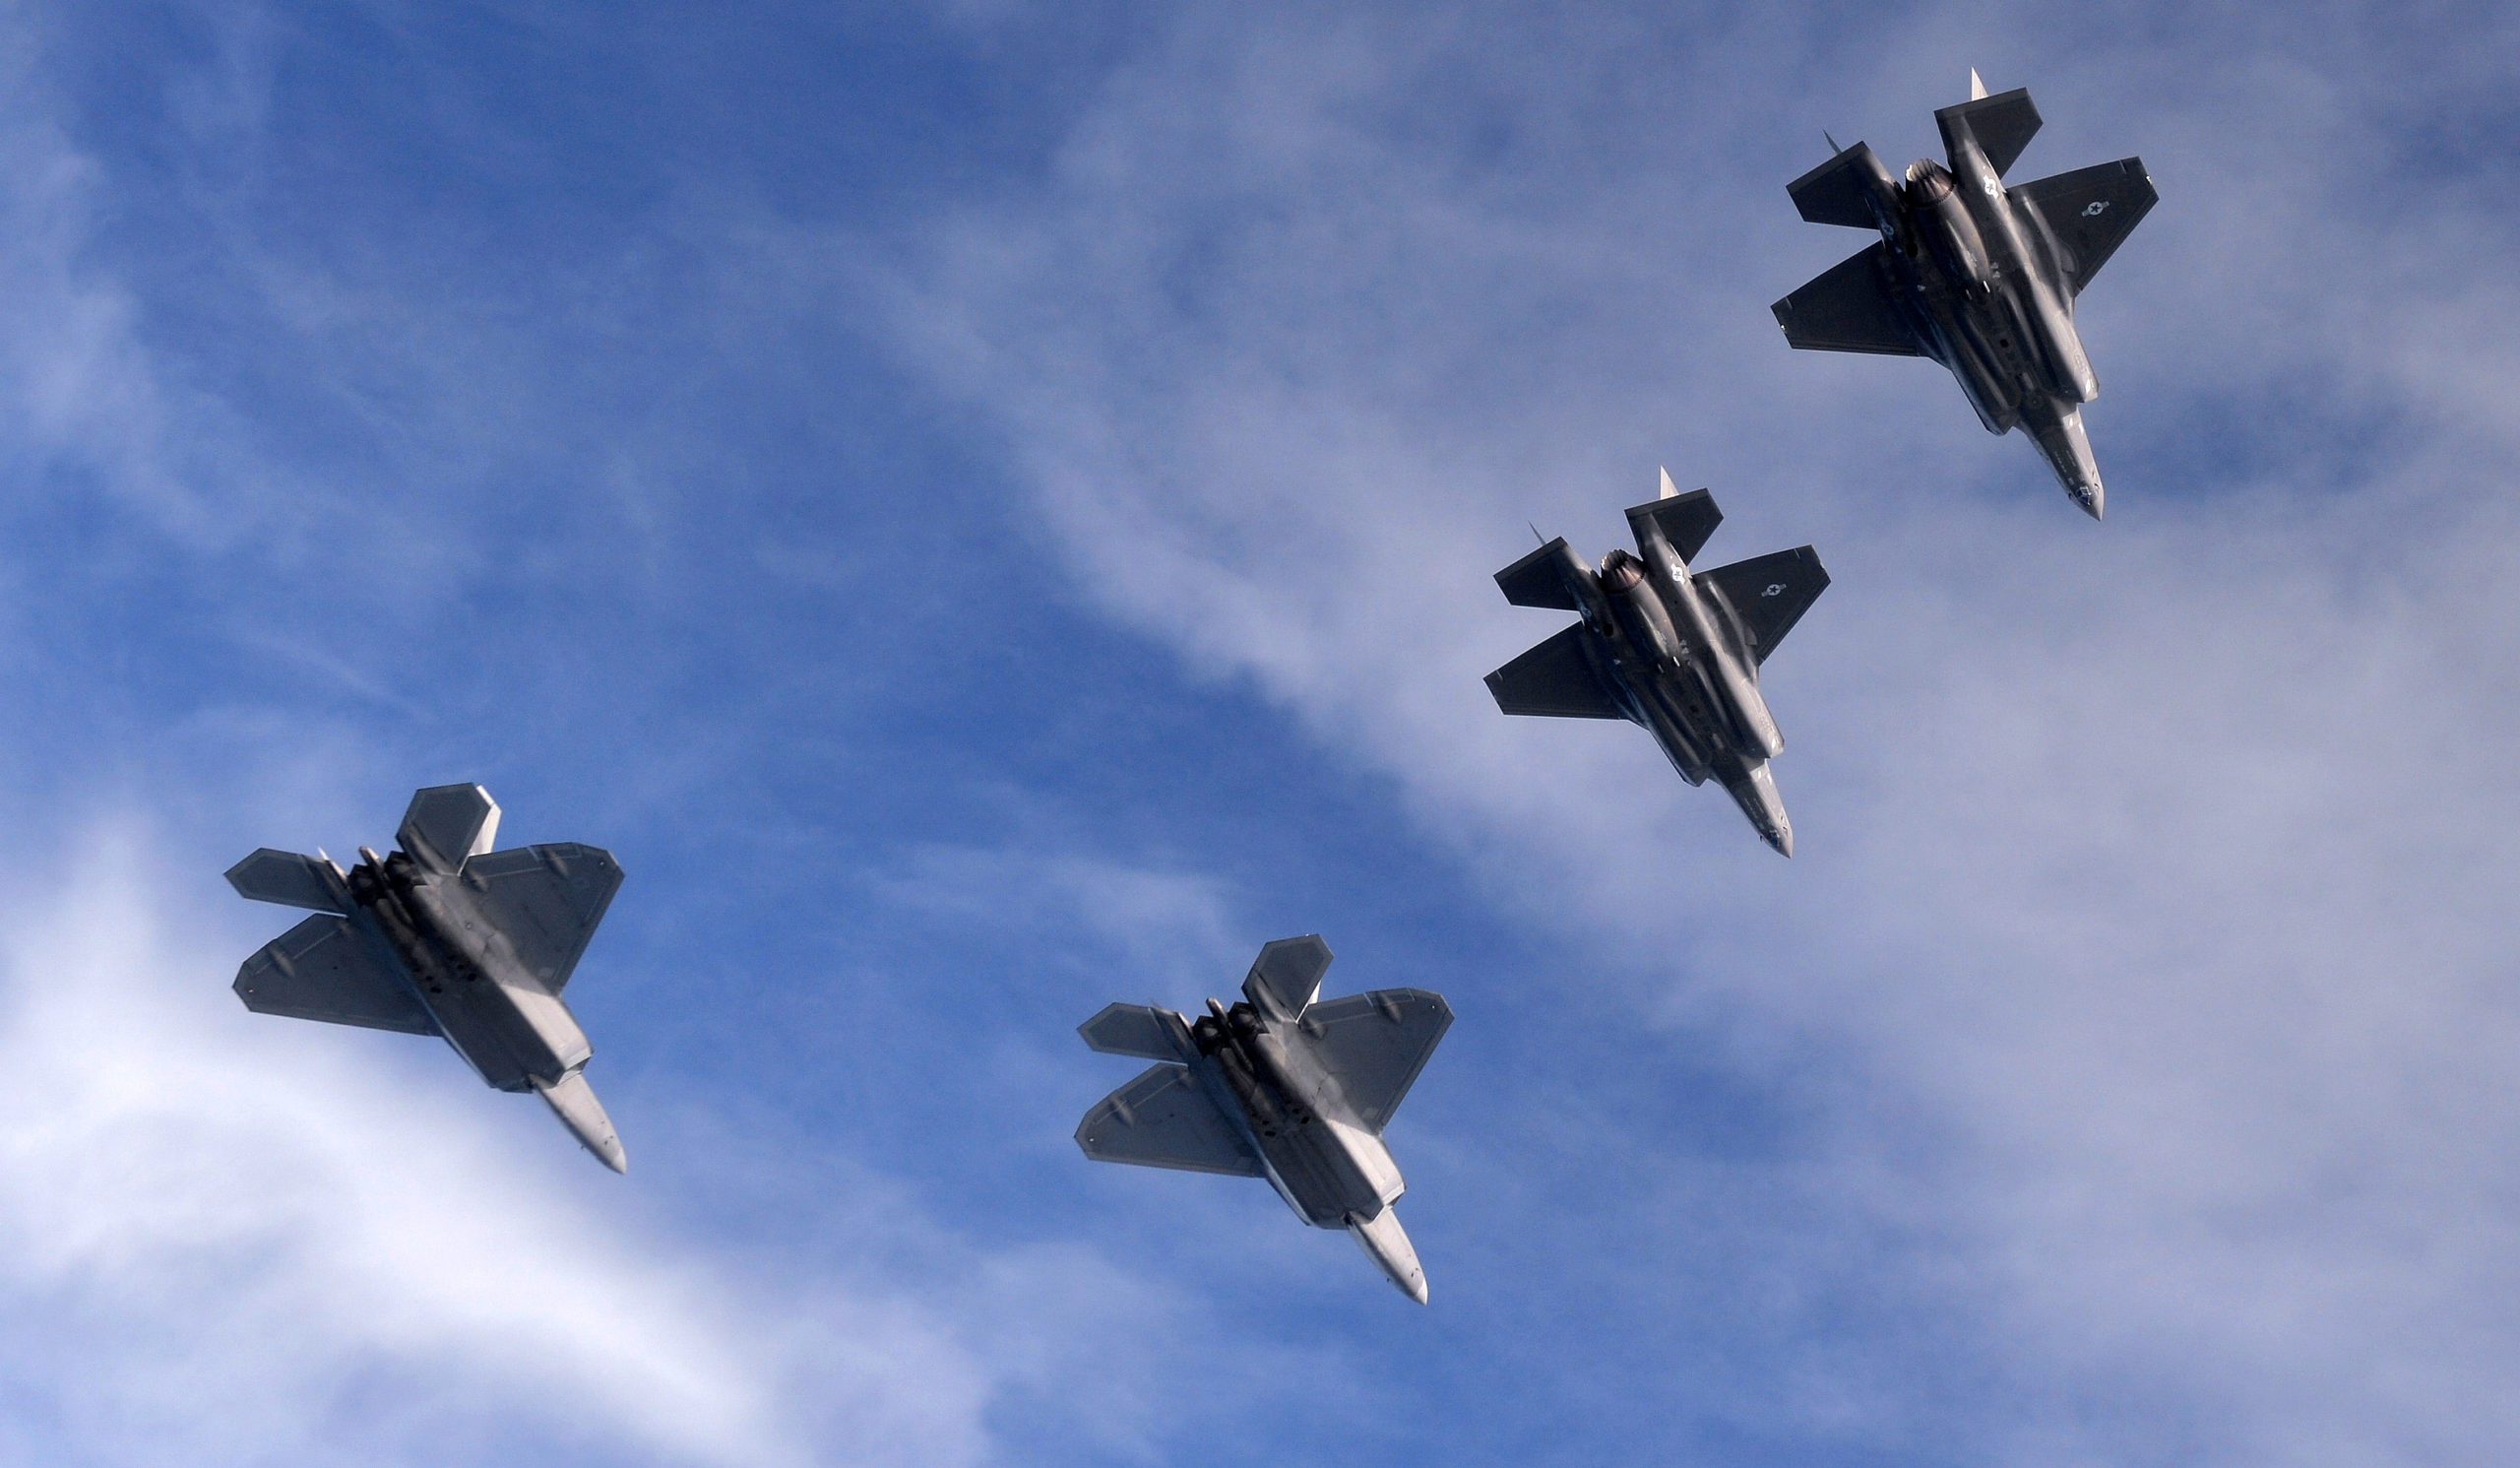 Cool Photos Of F-22s And F-35s Flying Together For The First Time